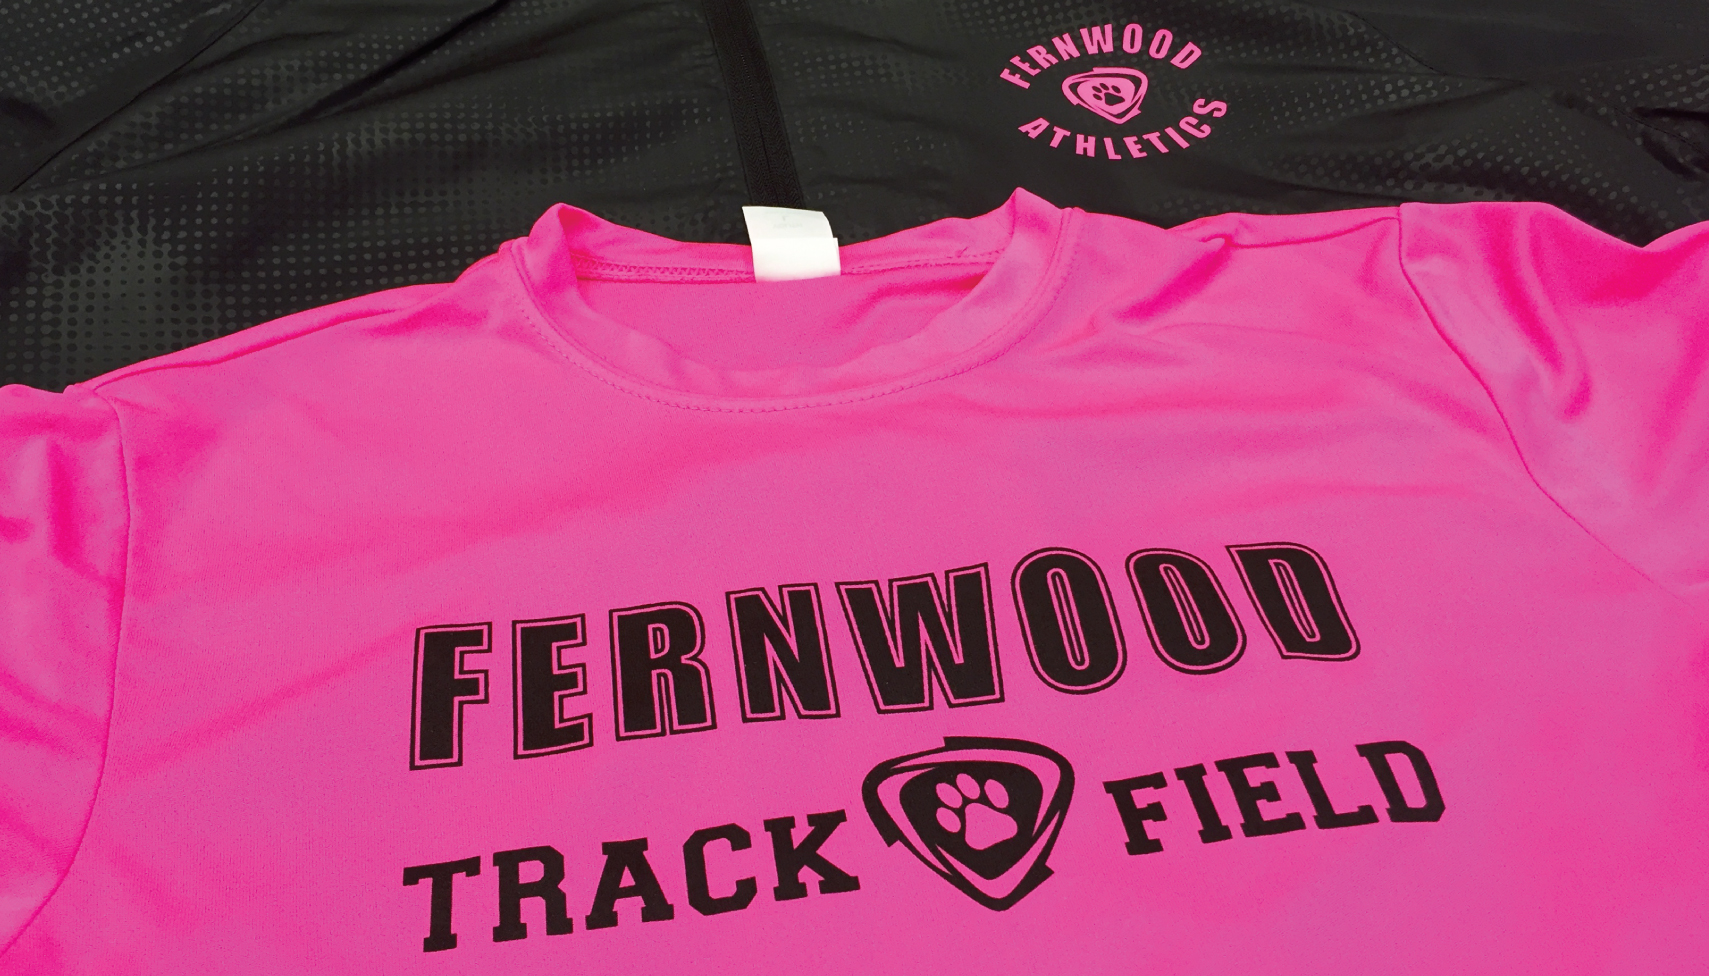 Fernwood XC Cross Country Track Apparel by Ontra Marketing Group